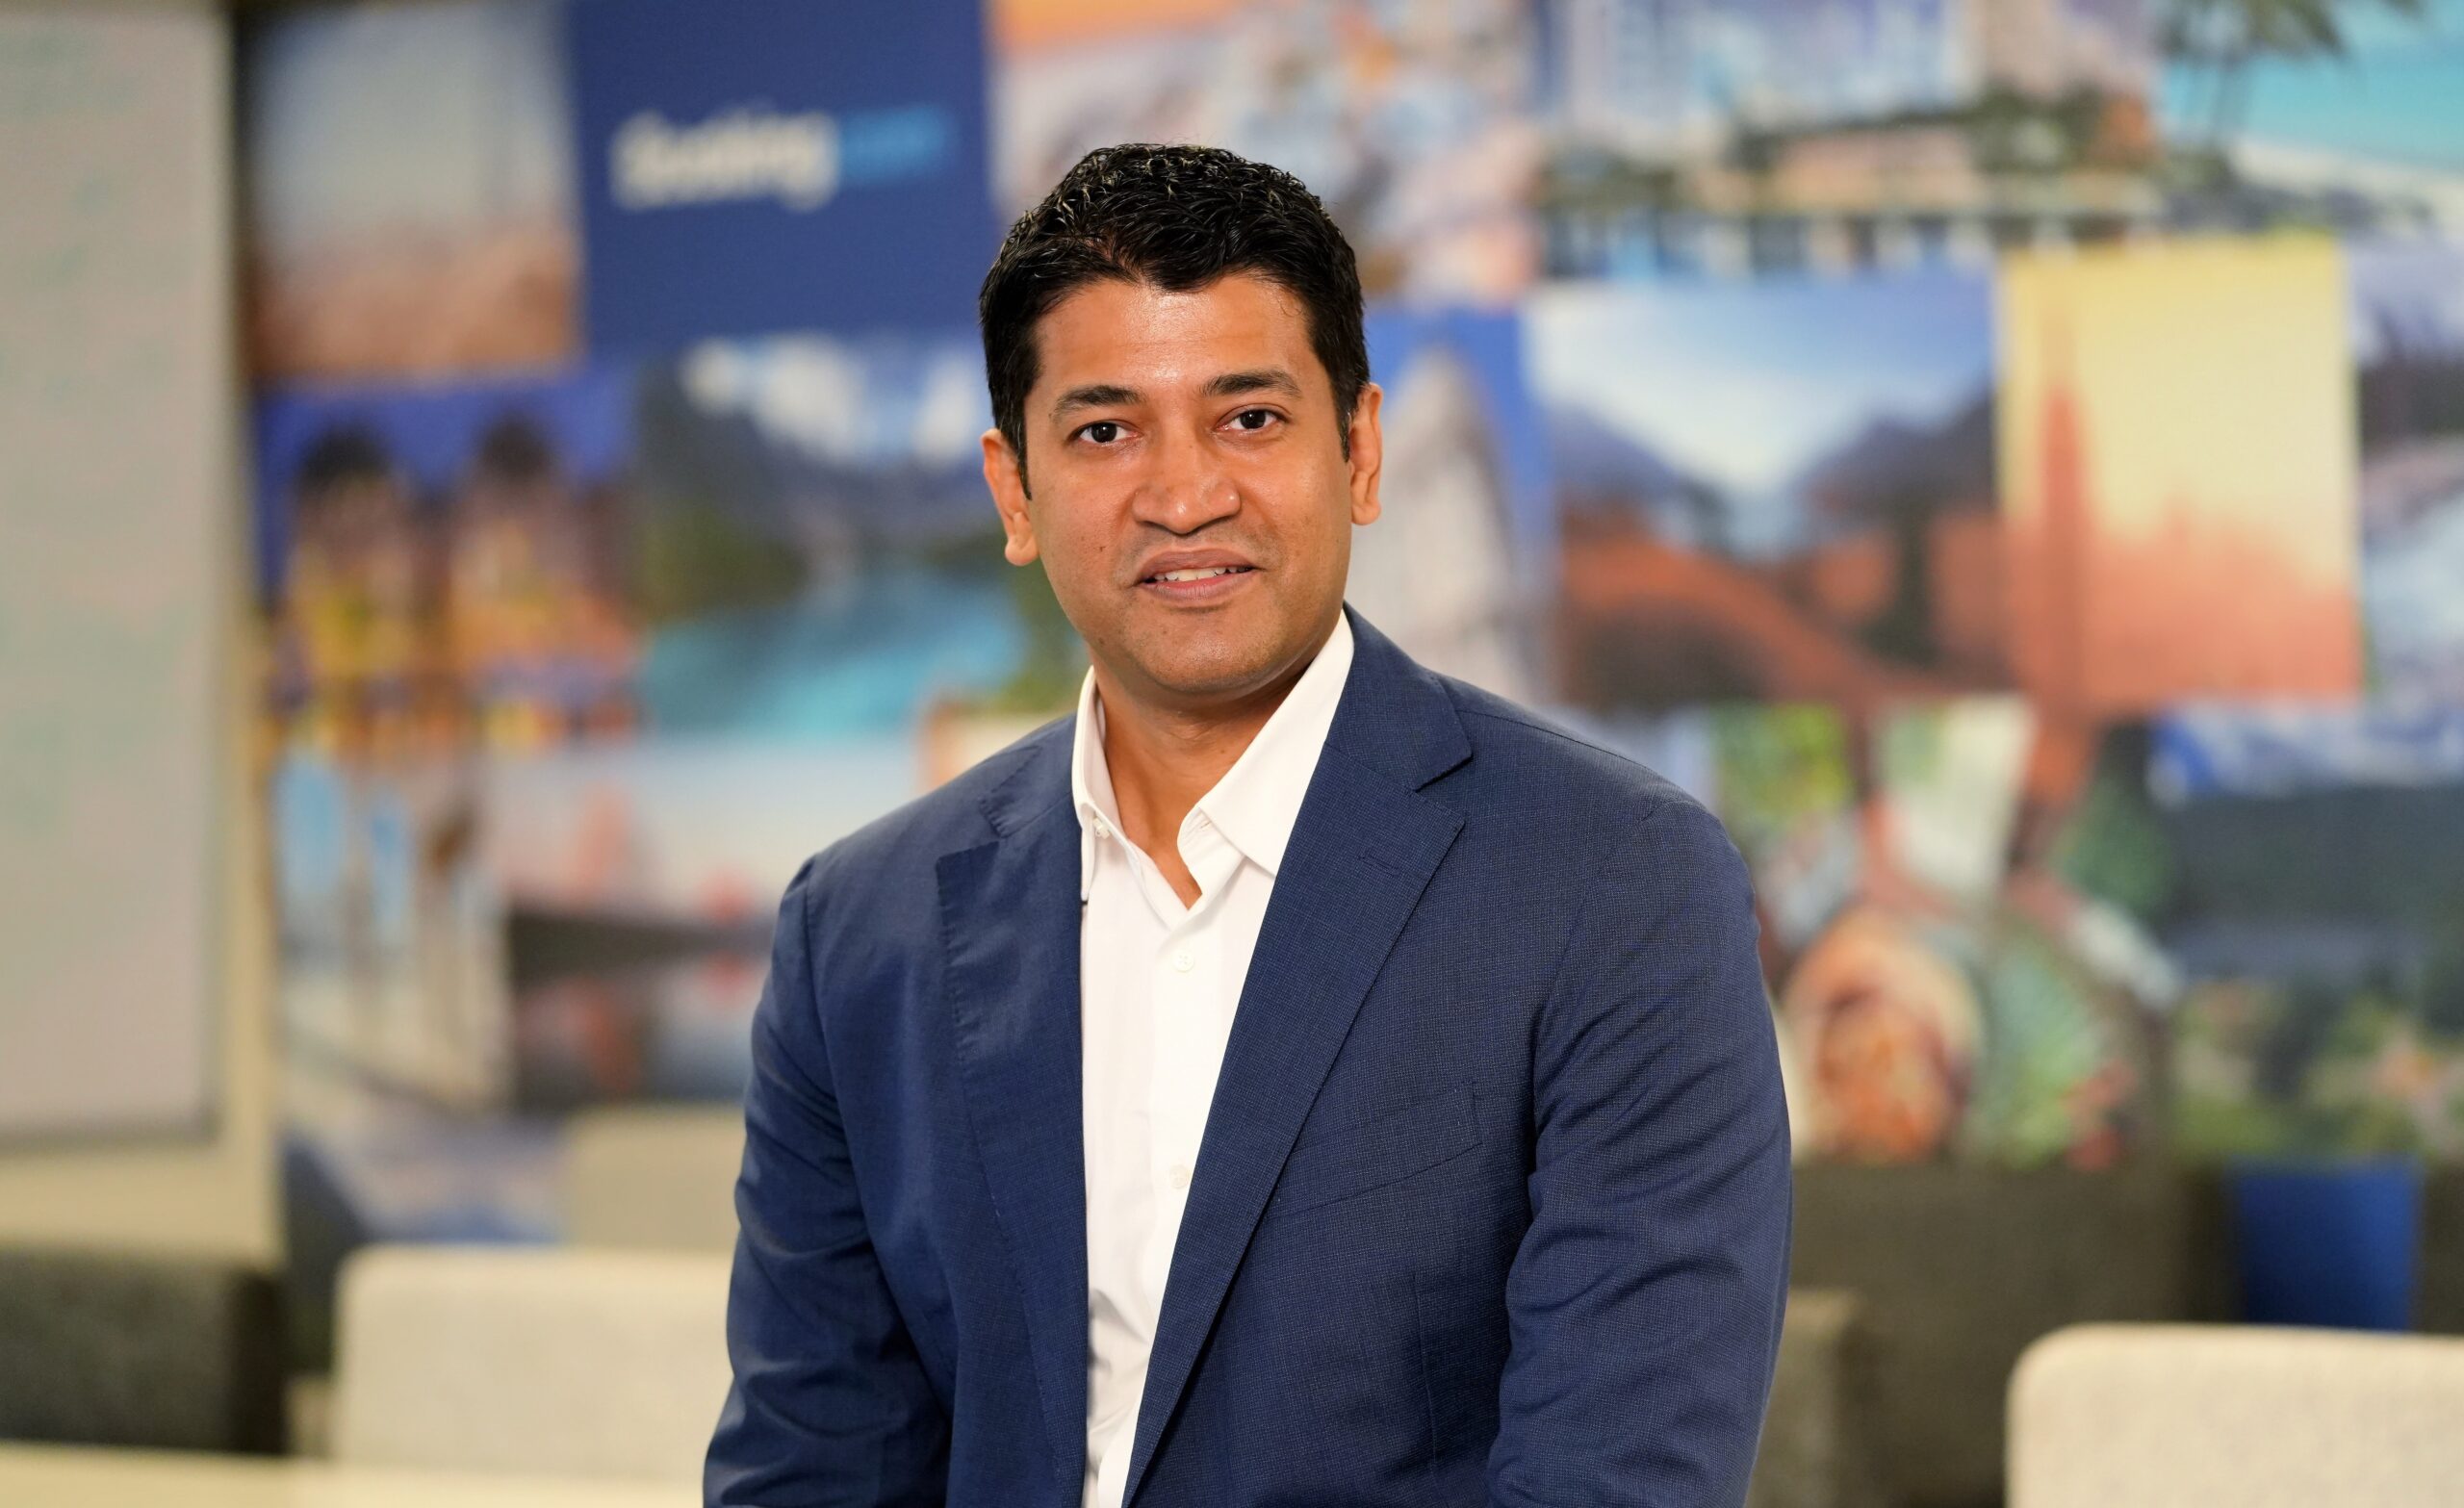 Booking.com appoints Santosh Kumar as Country Manager for India, Sri Lanka, Maldives and Indonesia